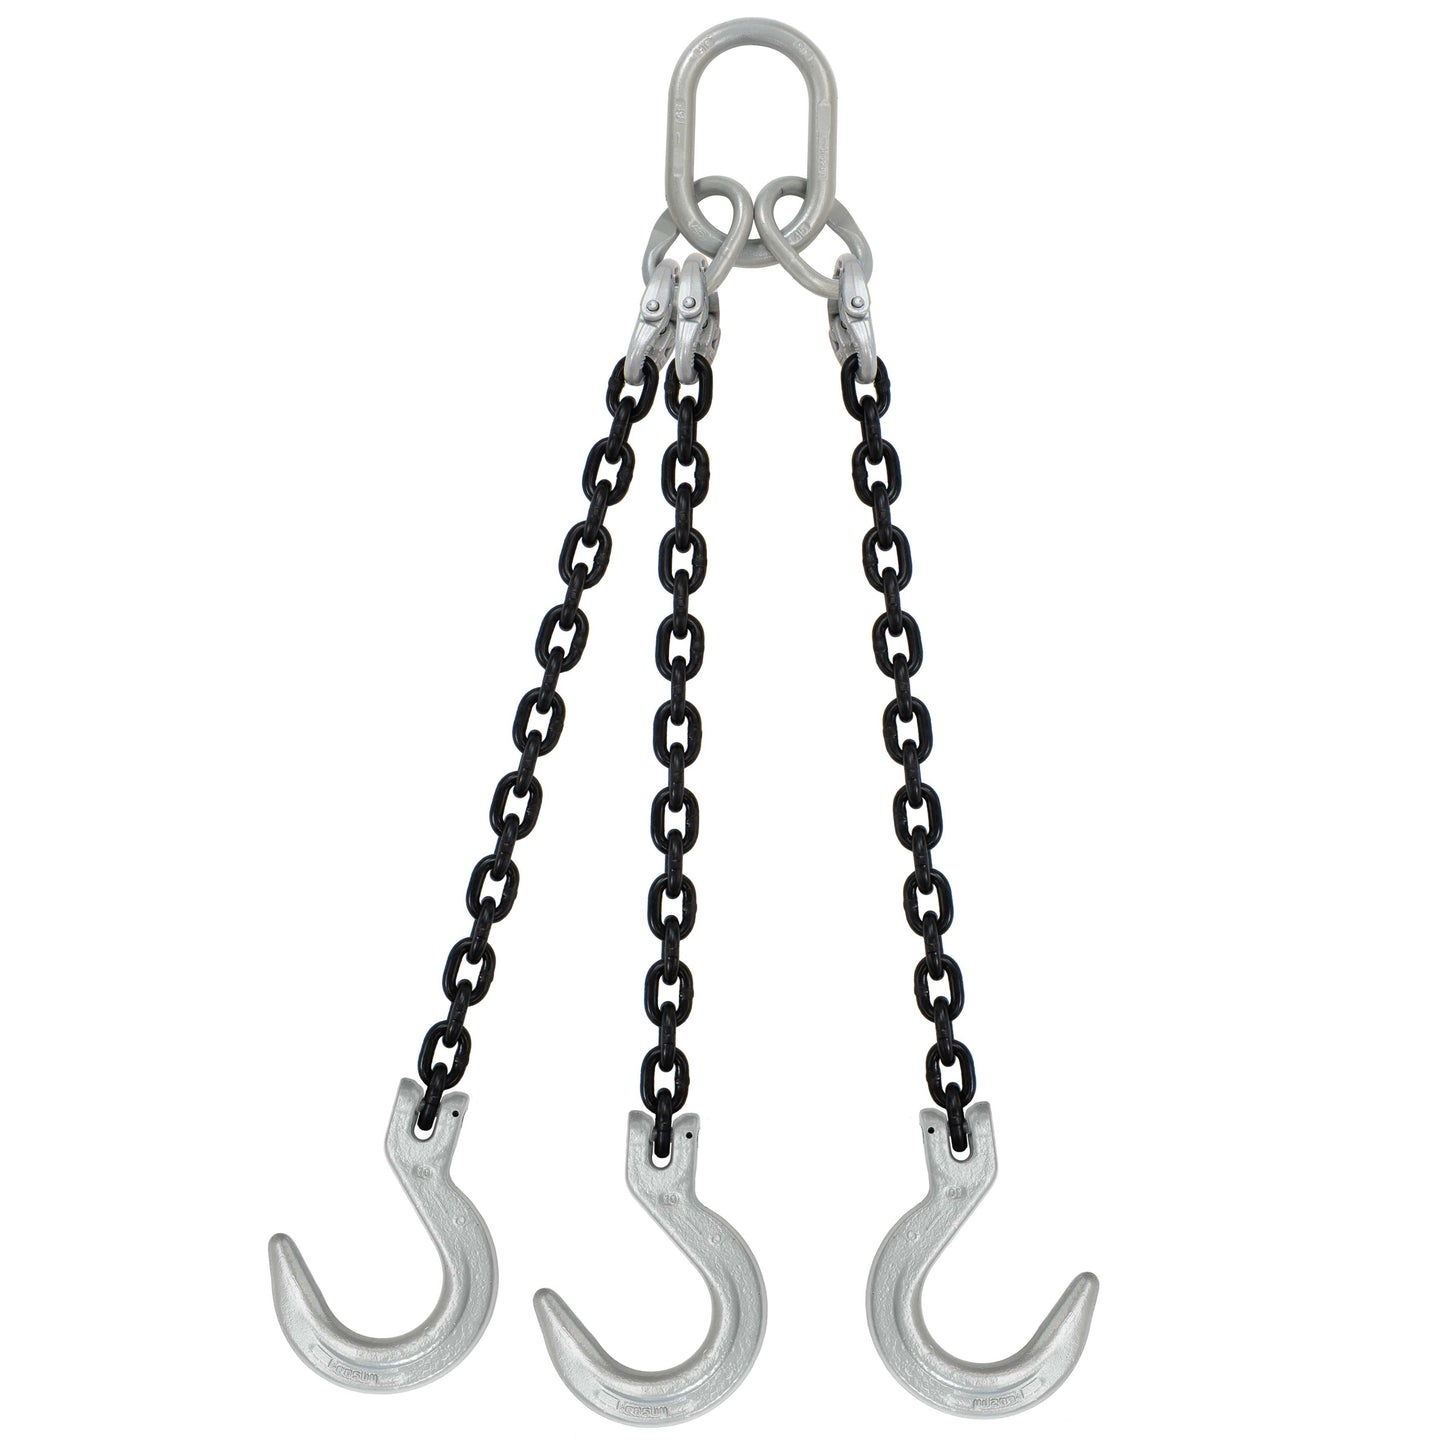 12 inch x 10 foot Domestic 3 Leg Chain Sling w Crosby Foundry Hooks Grade 100 image 1 of 2